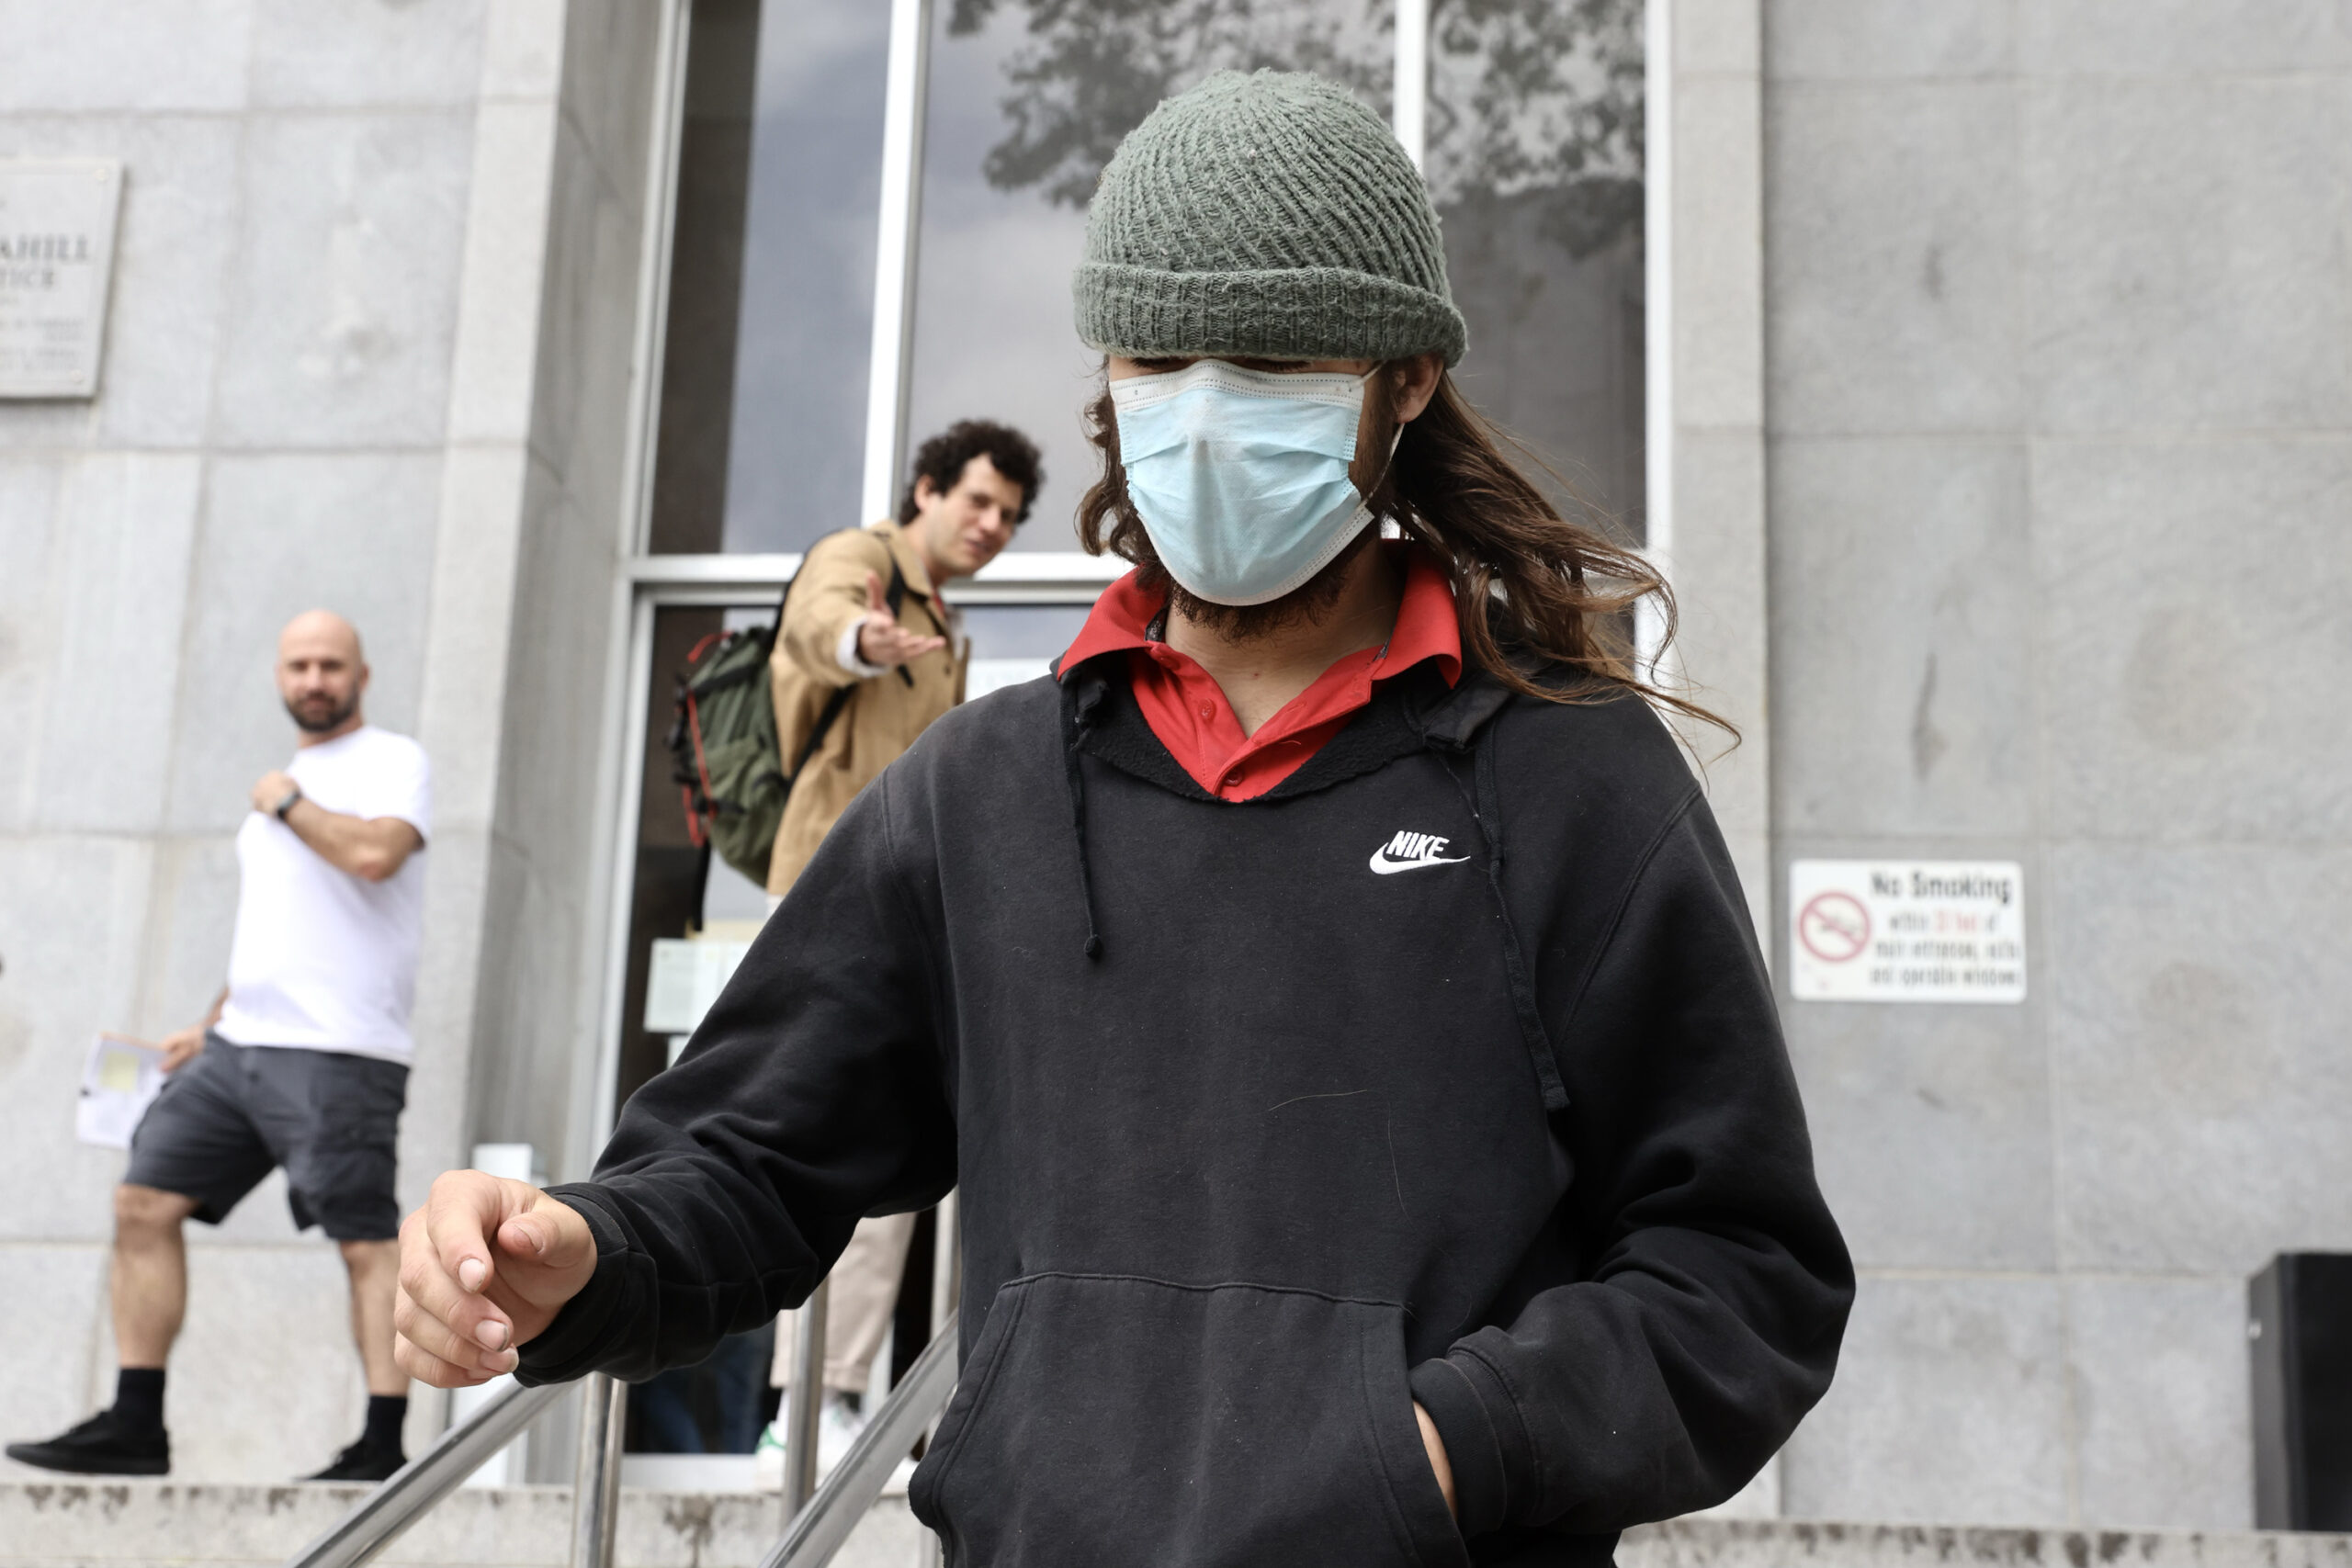 A person in a medical mask, beanie, and Nike hoodie descends steps with two men in the background.